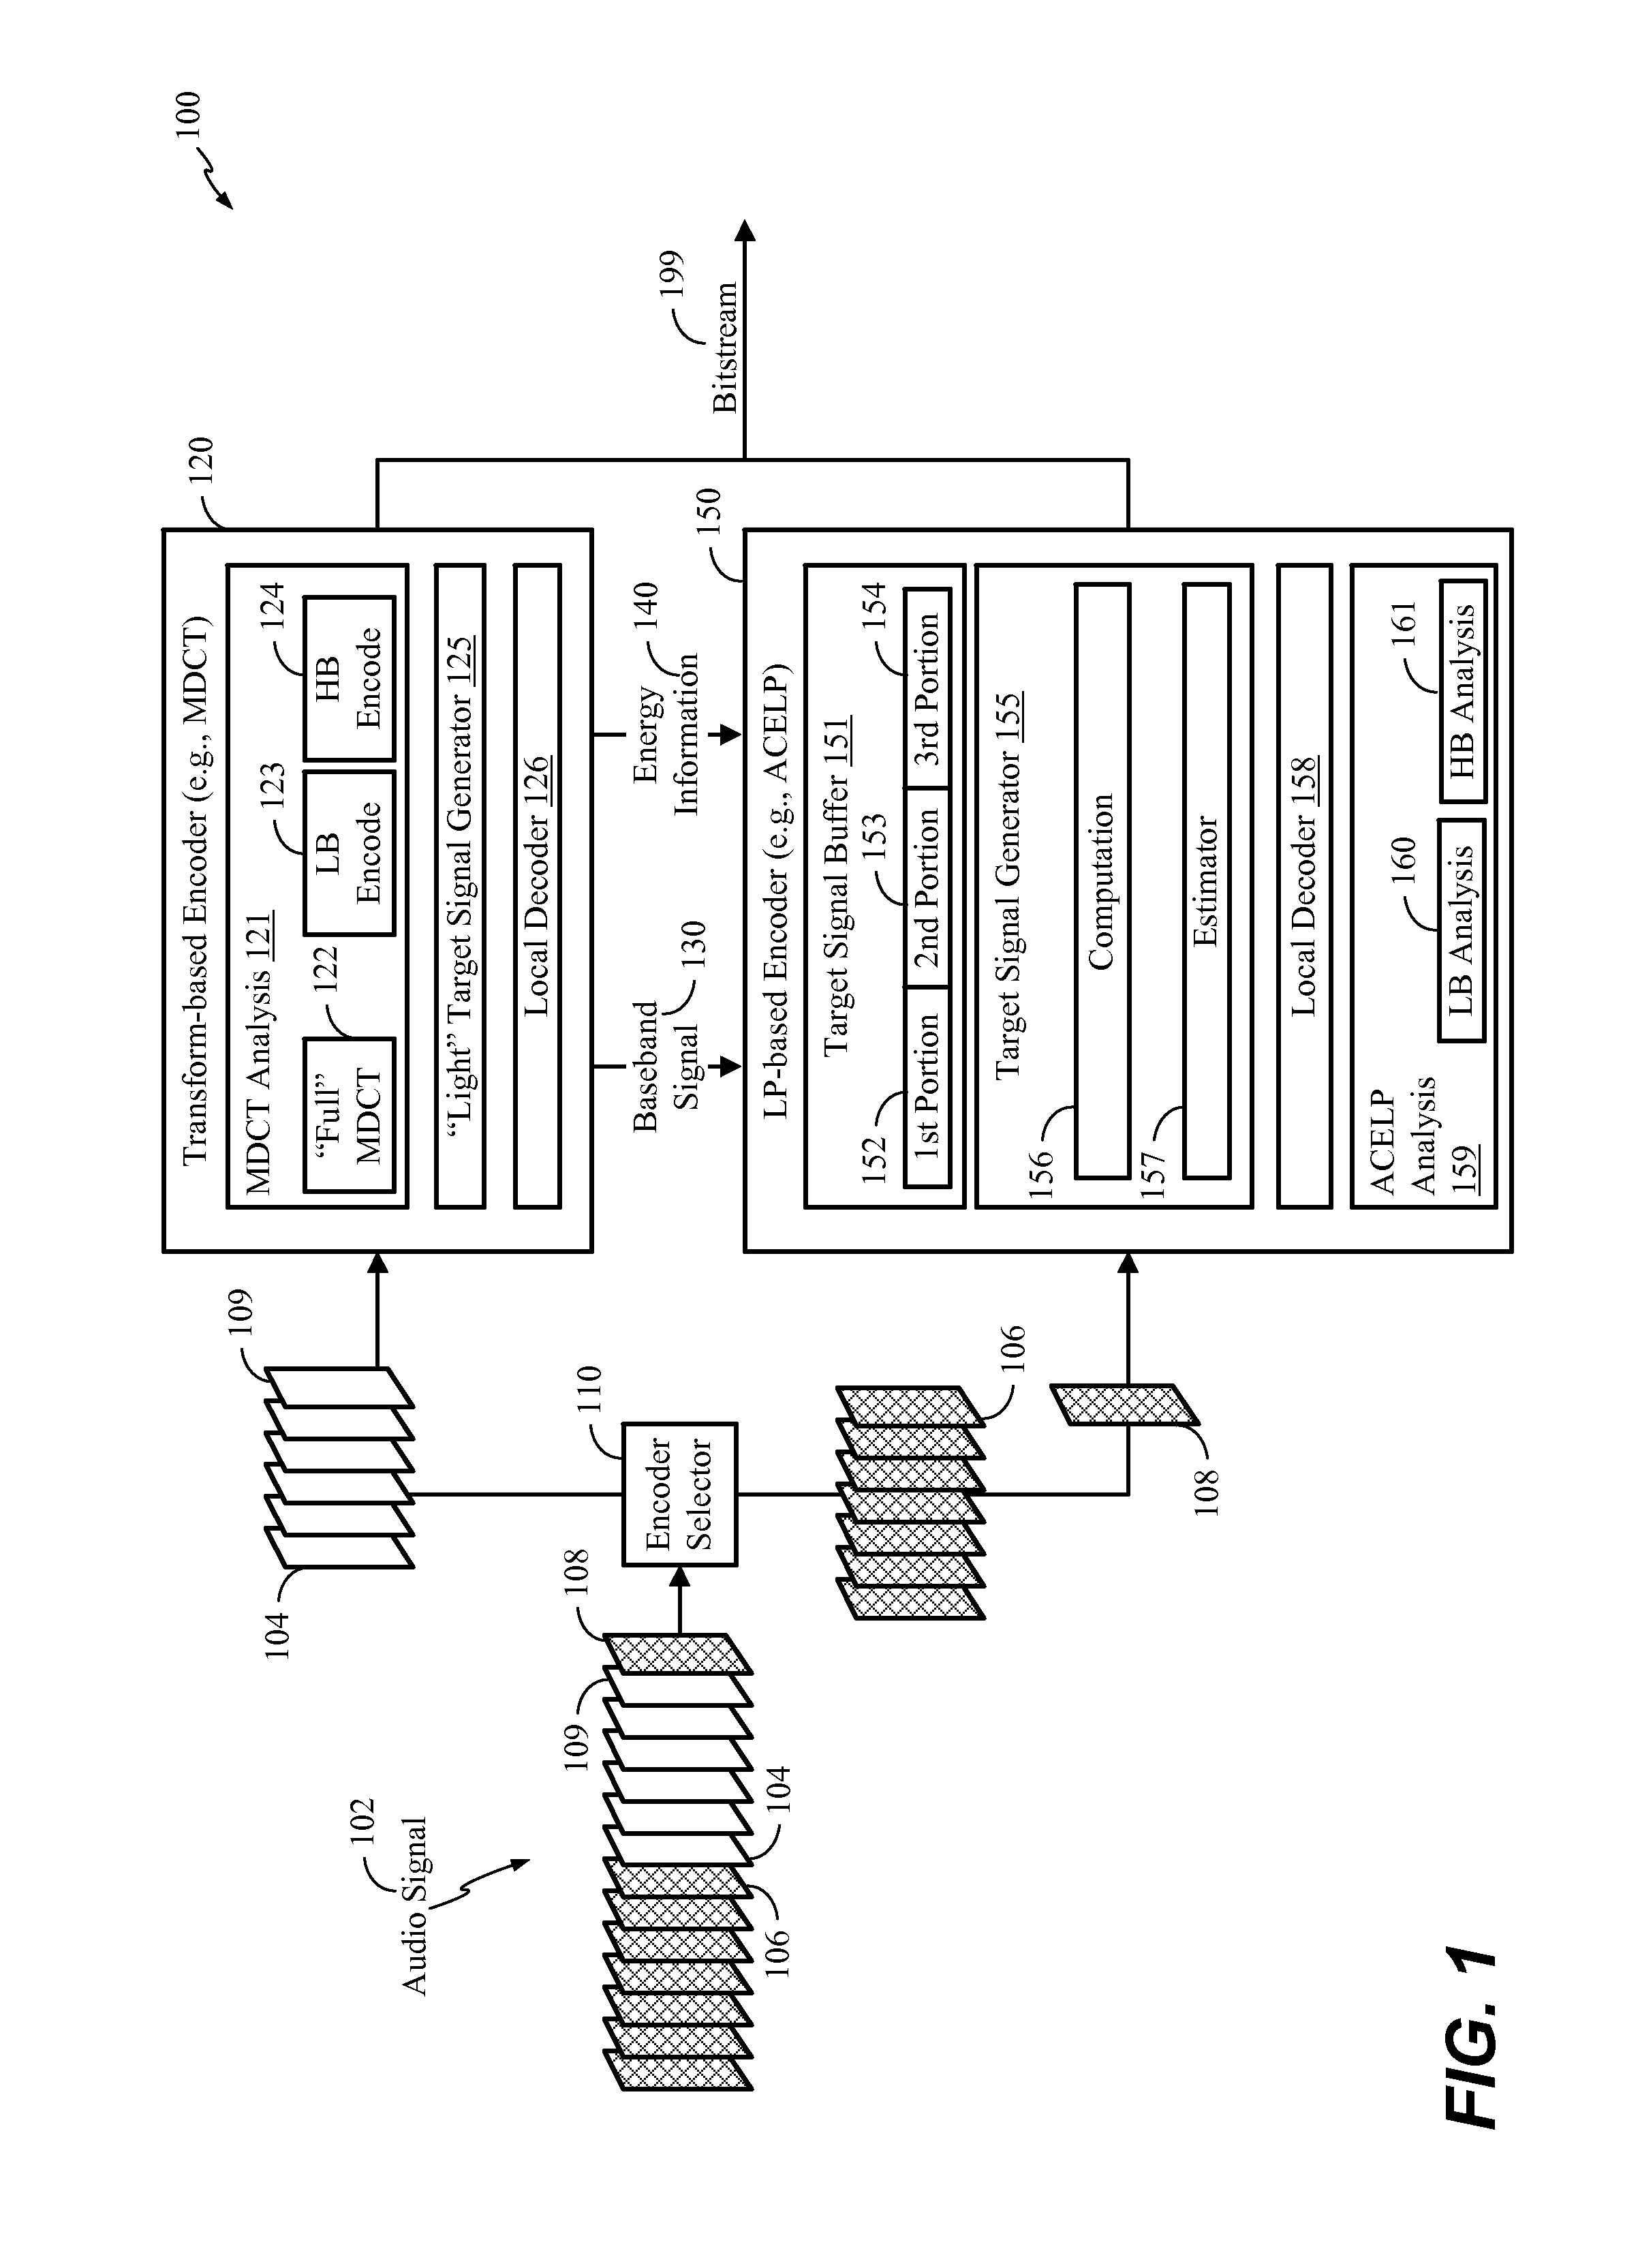 Systems and methods of switching coding technologies at a device